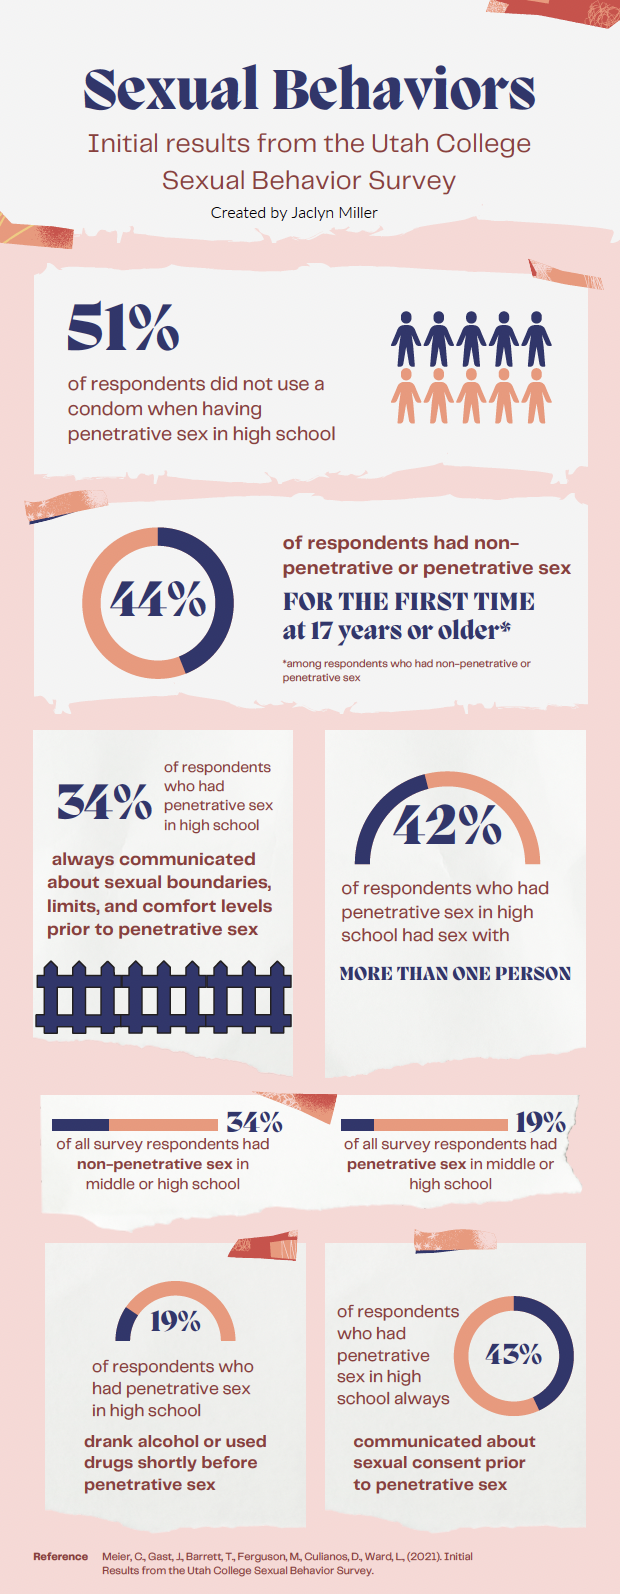 Heading: Sexual Behaviors. Initial results from the Utah College Sexual Behavior Survey. Created by Jaclyn Miller. 51% of respondents did not use a condom when having penetrative sex in high school. 44% of respondents had non-penetrative or penetrative sex for the first time at 17 years or older* *among respondents who had non-penetrative or penetrative sex. 34% of respondents who had penetrative sex in high school always communicated about sexual boundaries, limits, and comfort levels prior to penetrative sex. 42% of respondents who had penetrative sex in high school had sex with more than one person. 34% of all survey respondents had non-penetrative sex in middle or high school. 19% of all survey respondents had penetrative sex in middle or high school. 19% of respondents who had penetrative sex in high school drank alcohol or used drugs shortly before penetrative sex. 43% of respondents who had penetrative sex in high school always communicated about sexual consent prior to penetrative sex. Reference: Meier, C., East, J., Marrett, T., Ferguson, M., Culianos, D., Ward, L., (2021). Initial Results from the Utah College Sexual Behavior Survey.